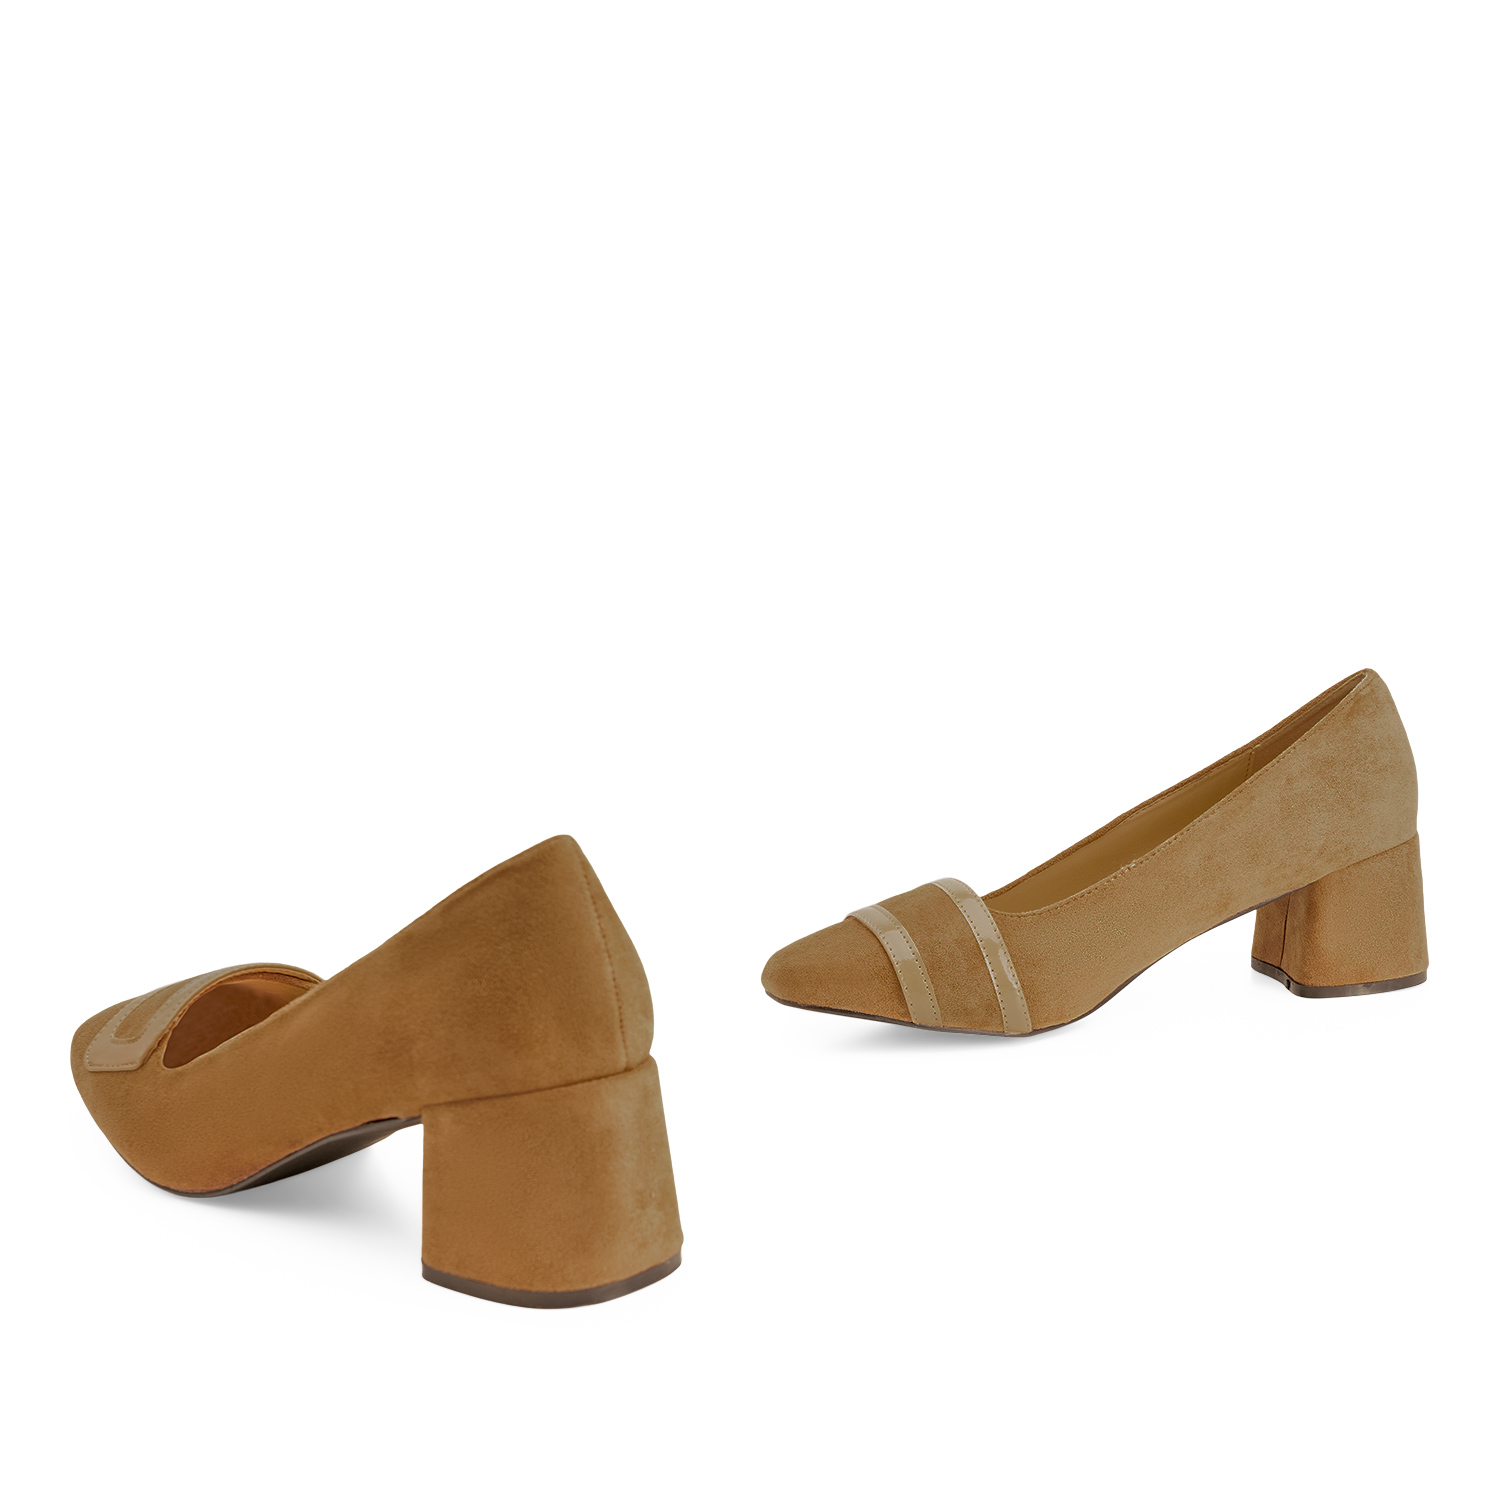 Heeled shoes in beige faux suede 